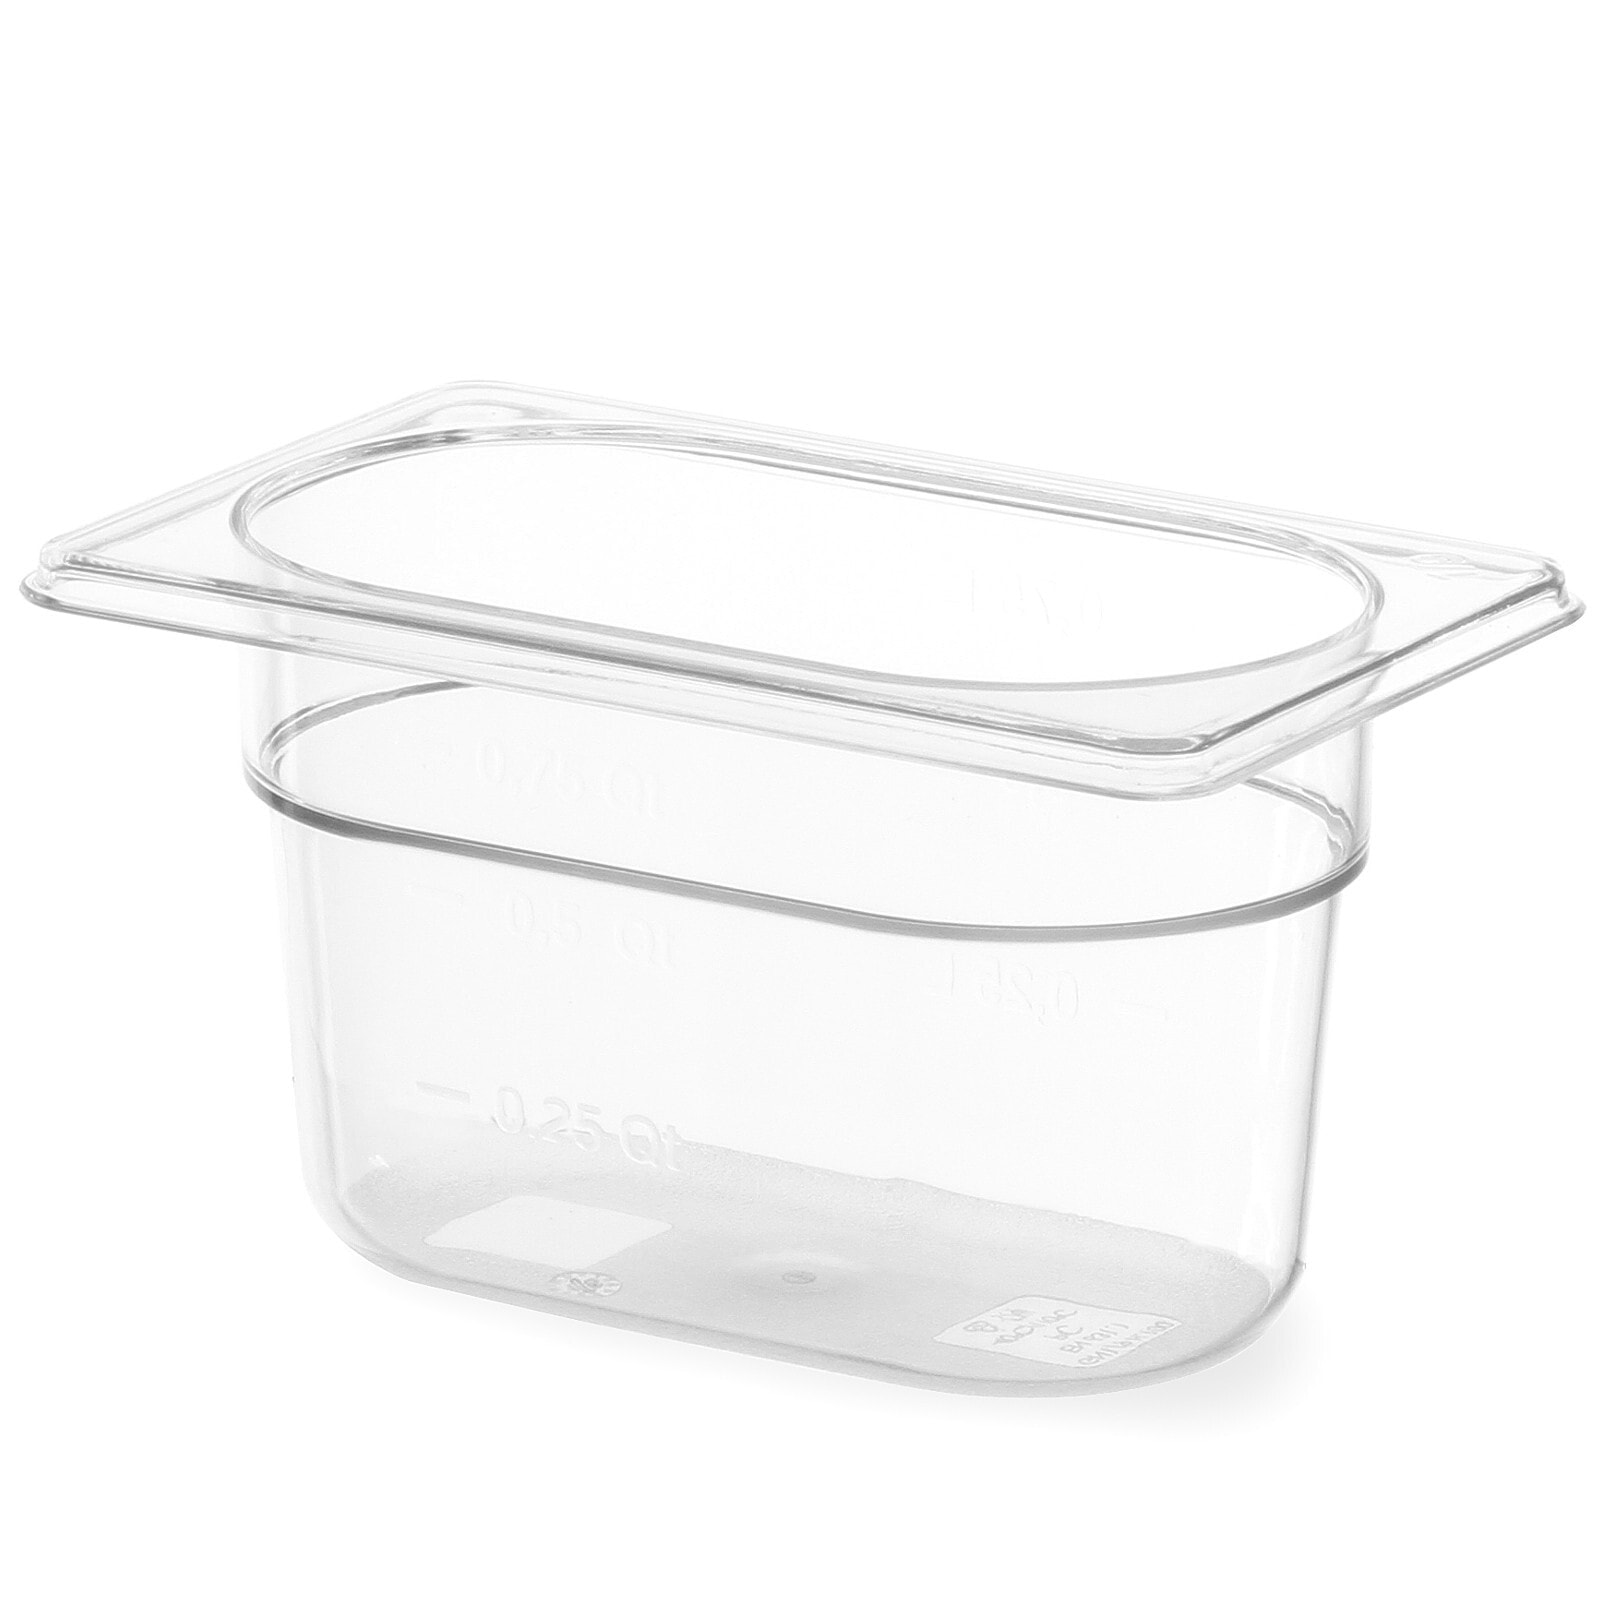 Transparent GN container made of polycarbonate GN 1/9 height 65 mm - Hendi 861837